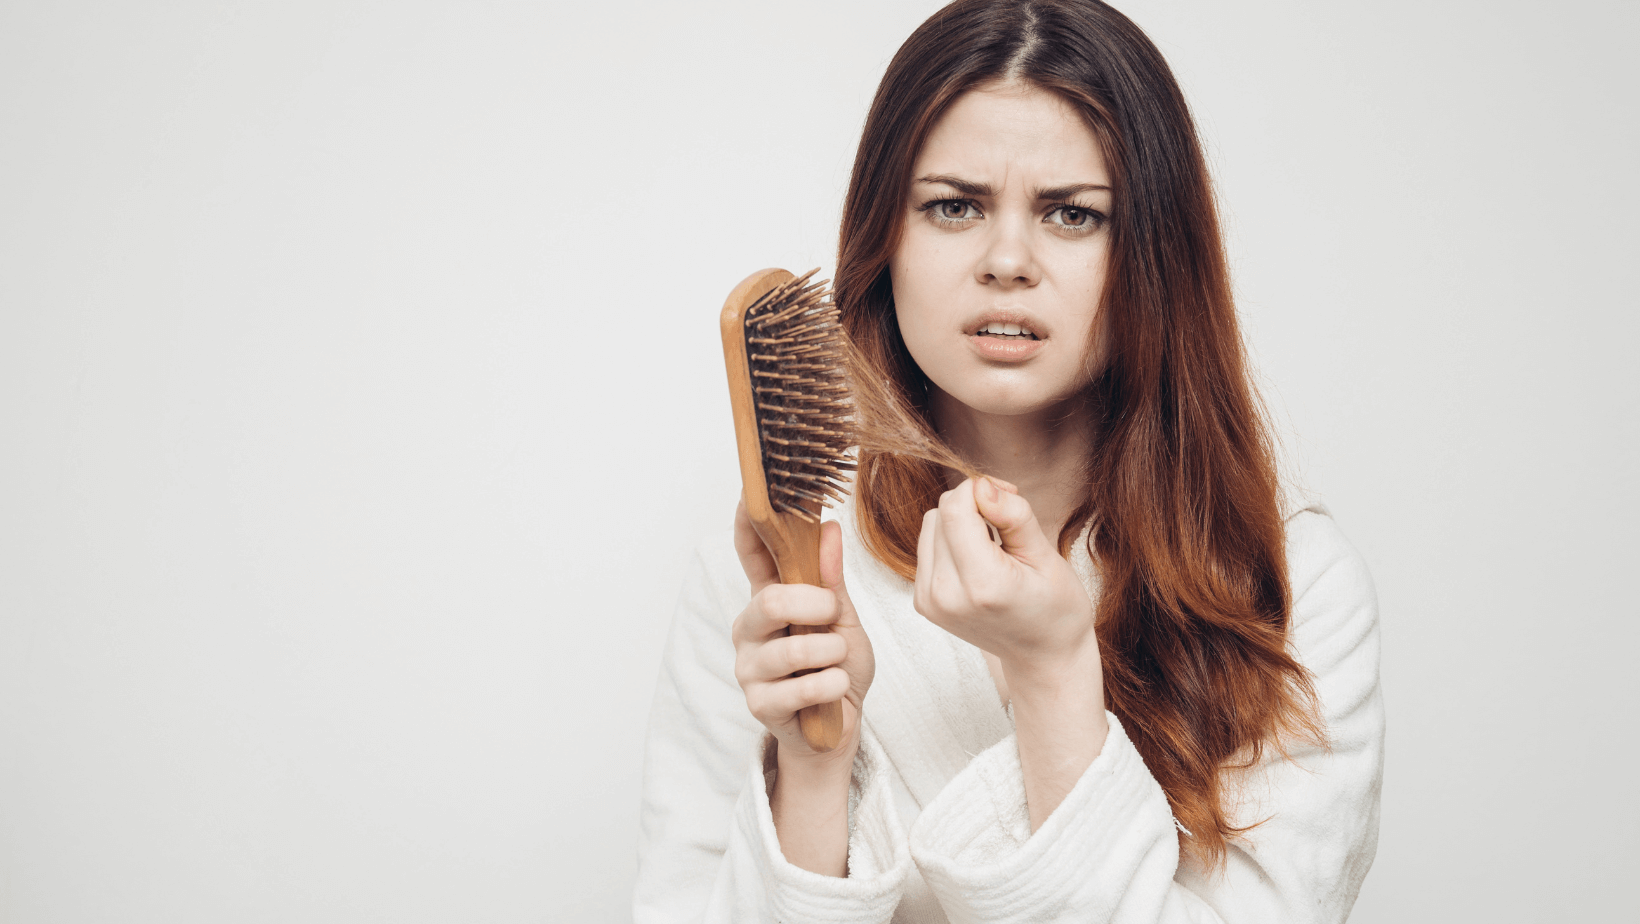 woman looking distressed holding hair brush full of hair